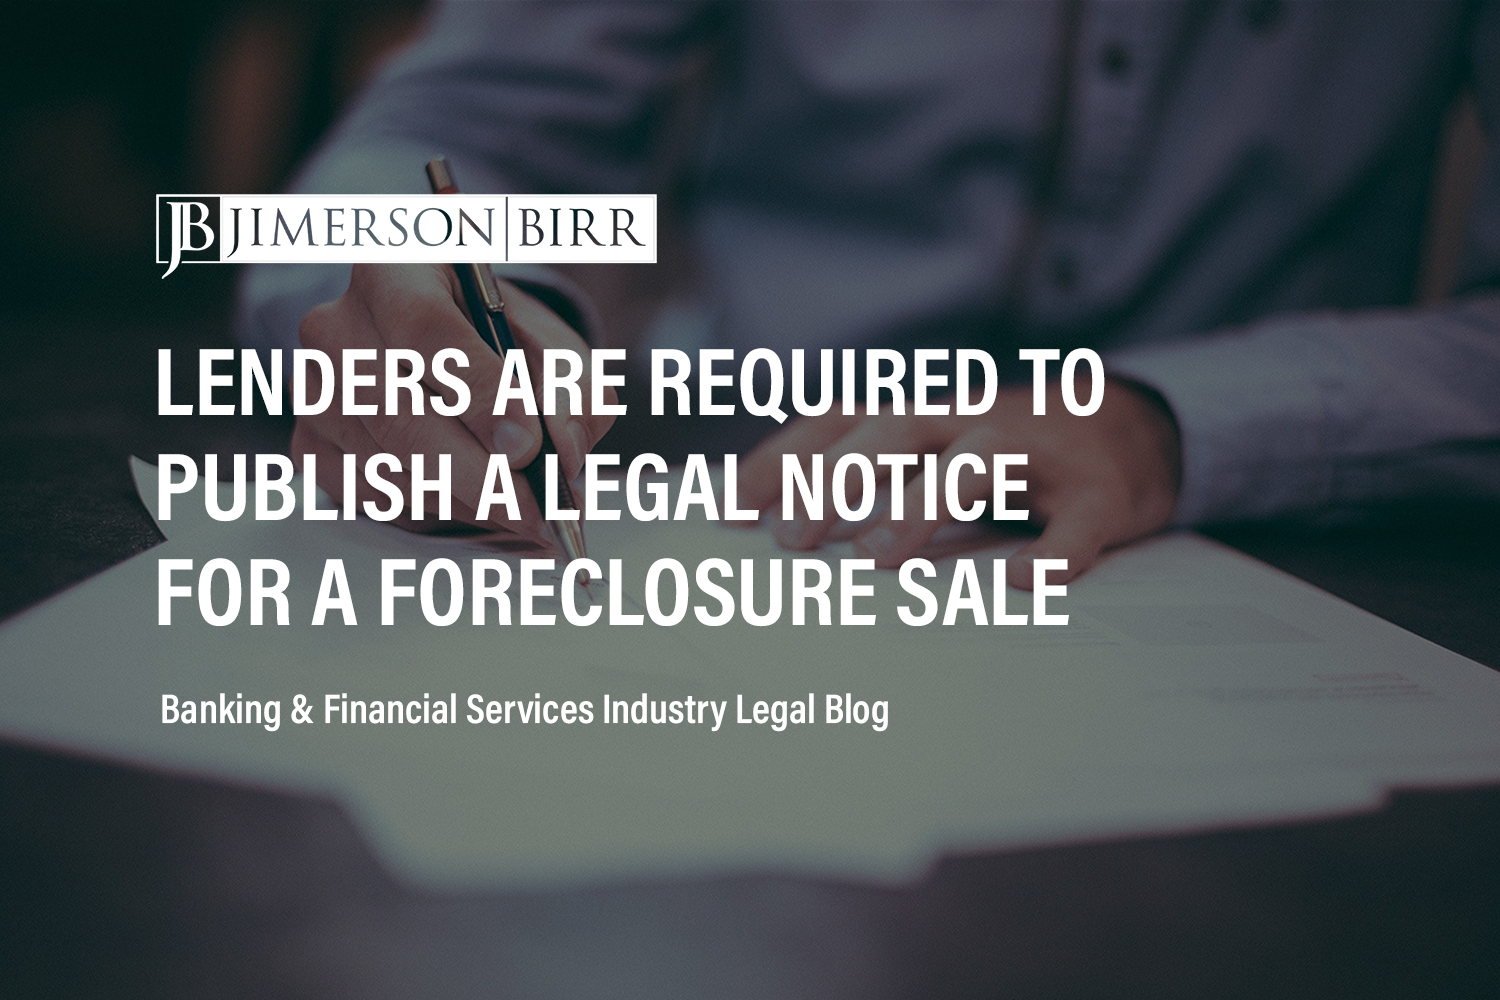 How to Publish a Legal Notice of a Foreclosure Sale